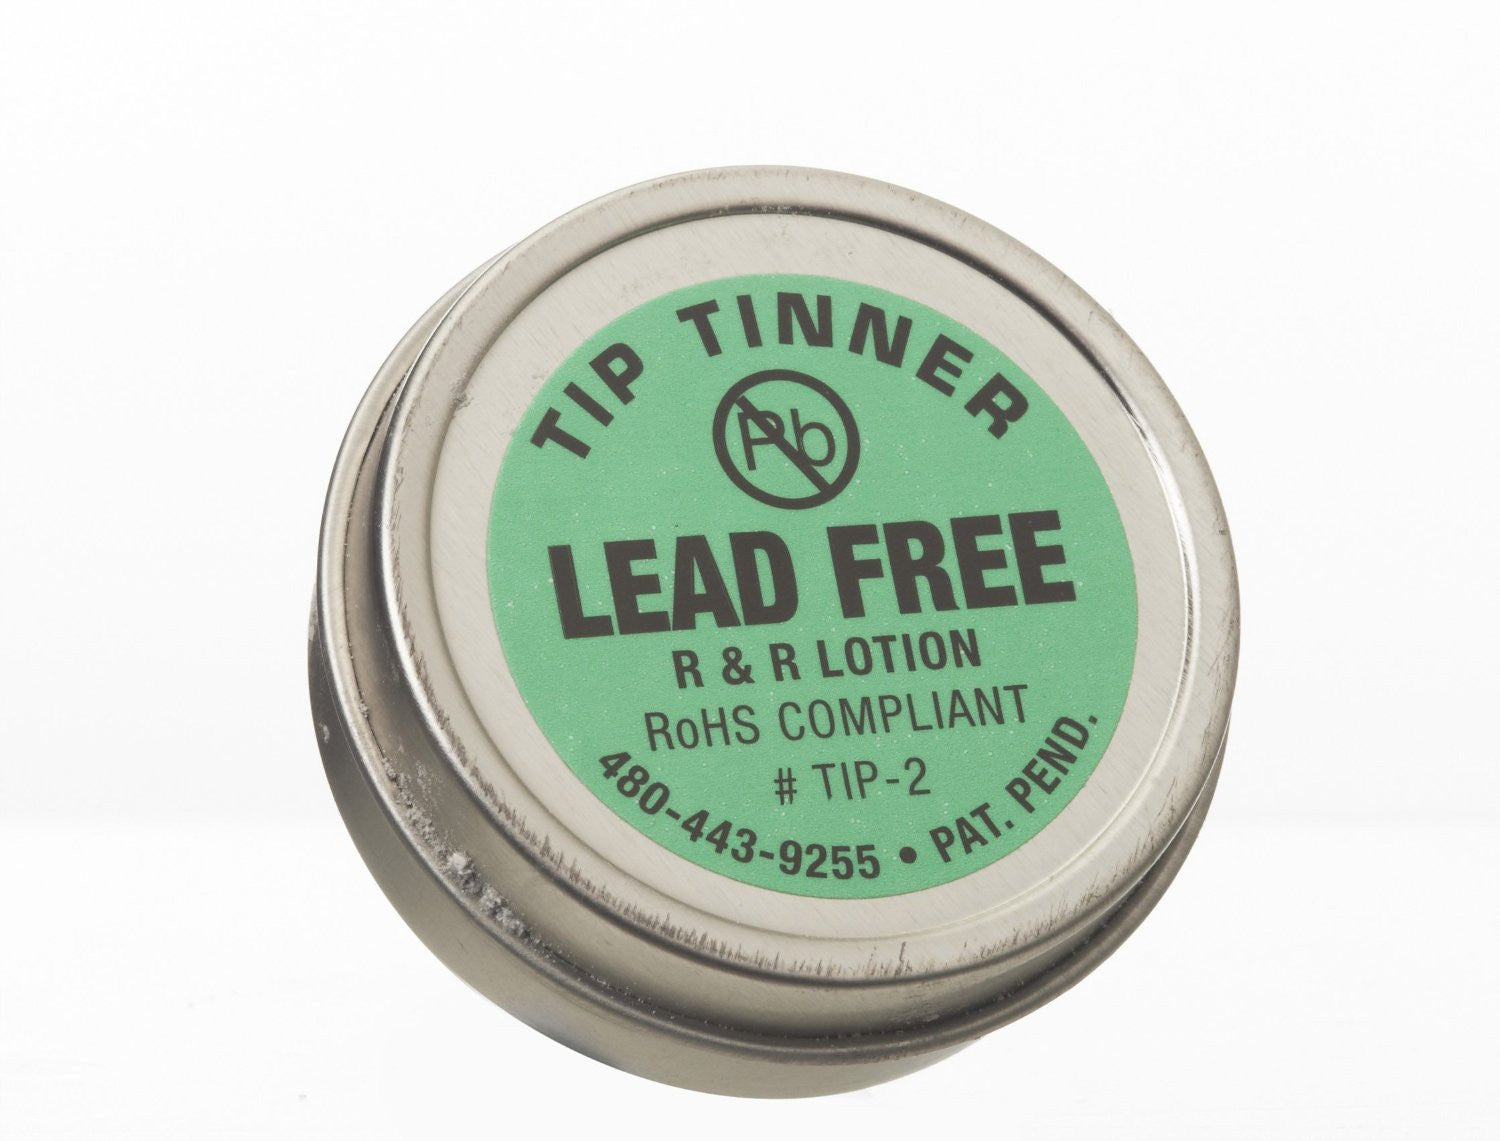 R&R Lotion I.C. Lead Free Tip Thinner 1-1/2 oz. Size For Soldering Iron Tips-eSafety Supplies, Inc